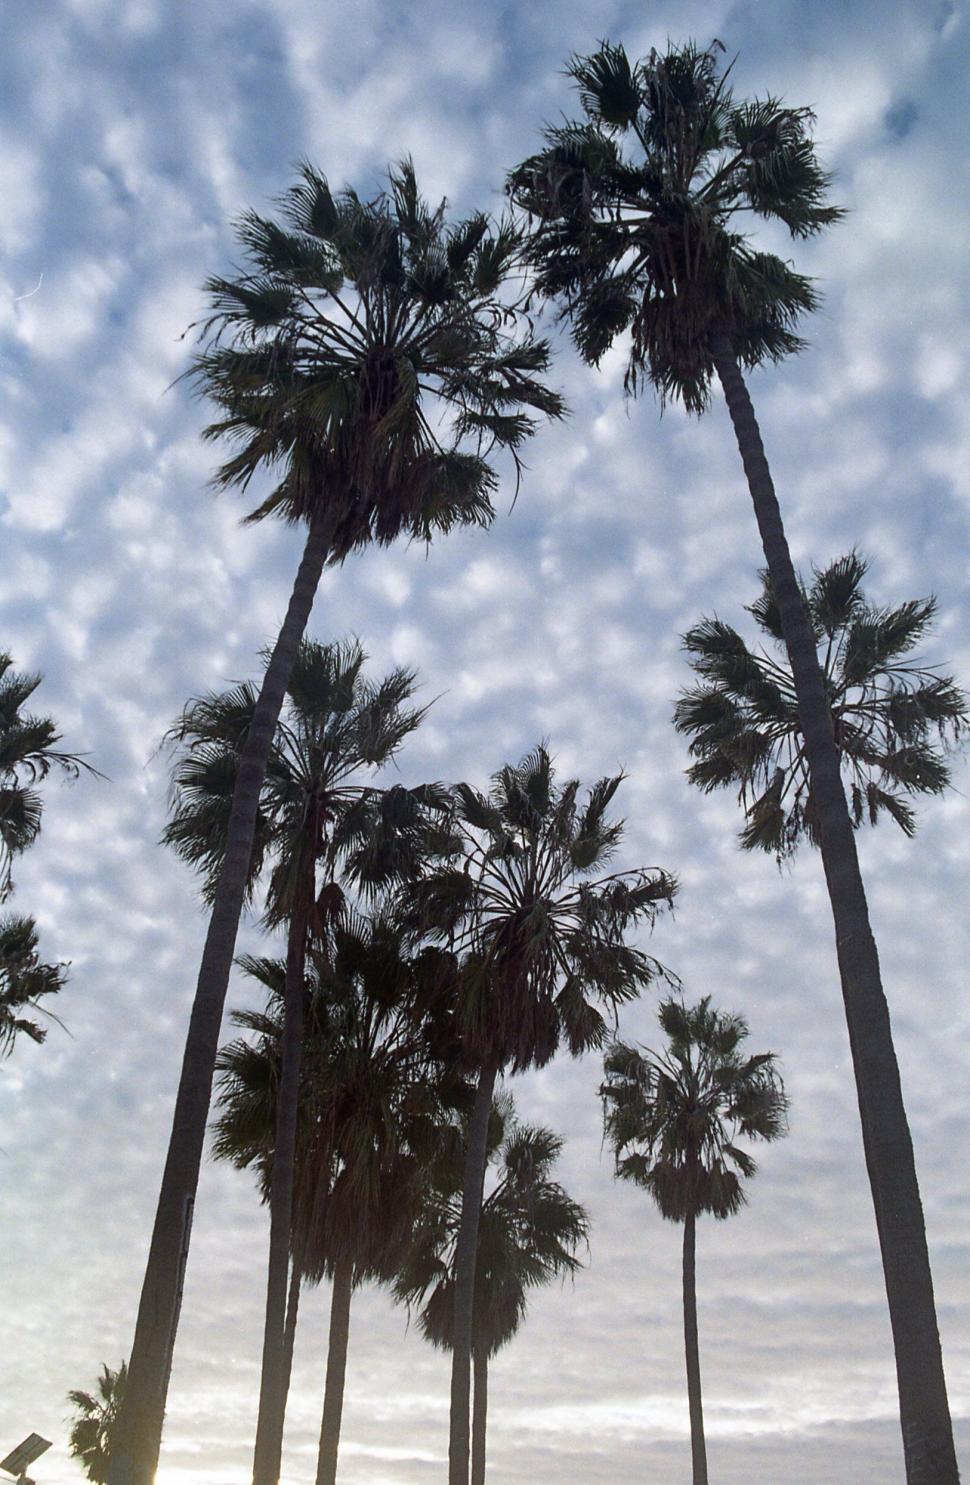 Free Image of Tall palm trees against a cloudy sky backdrop 